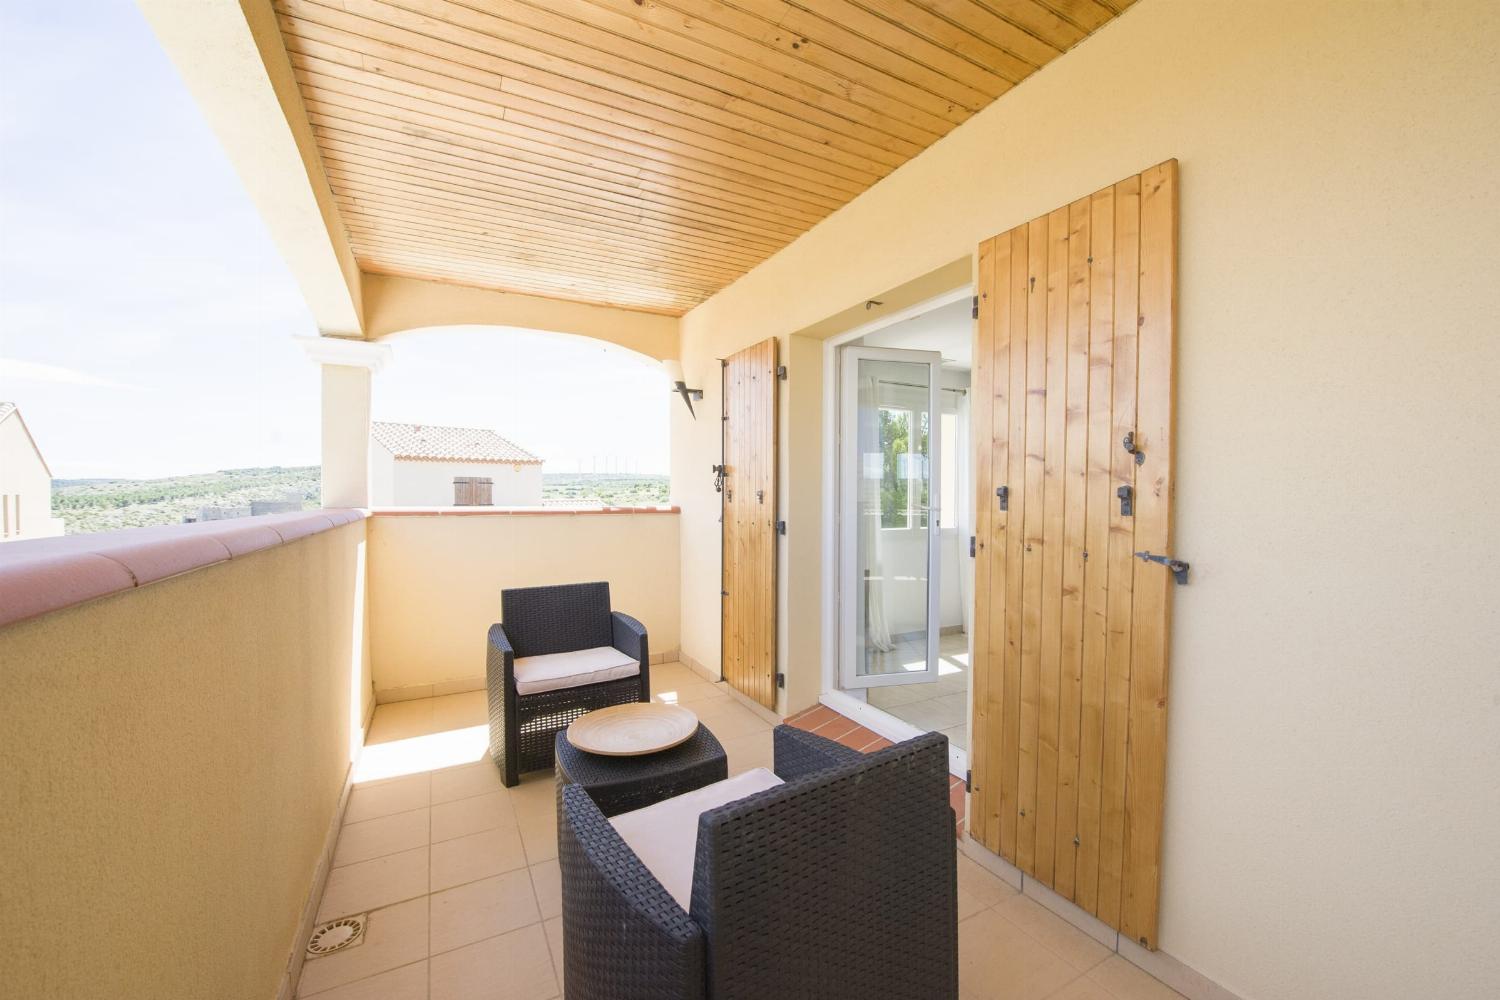 1st floor terrace | Holiday villa in the South of France